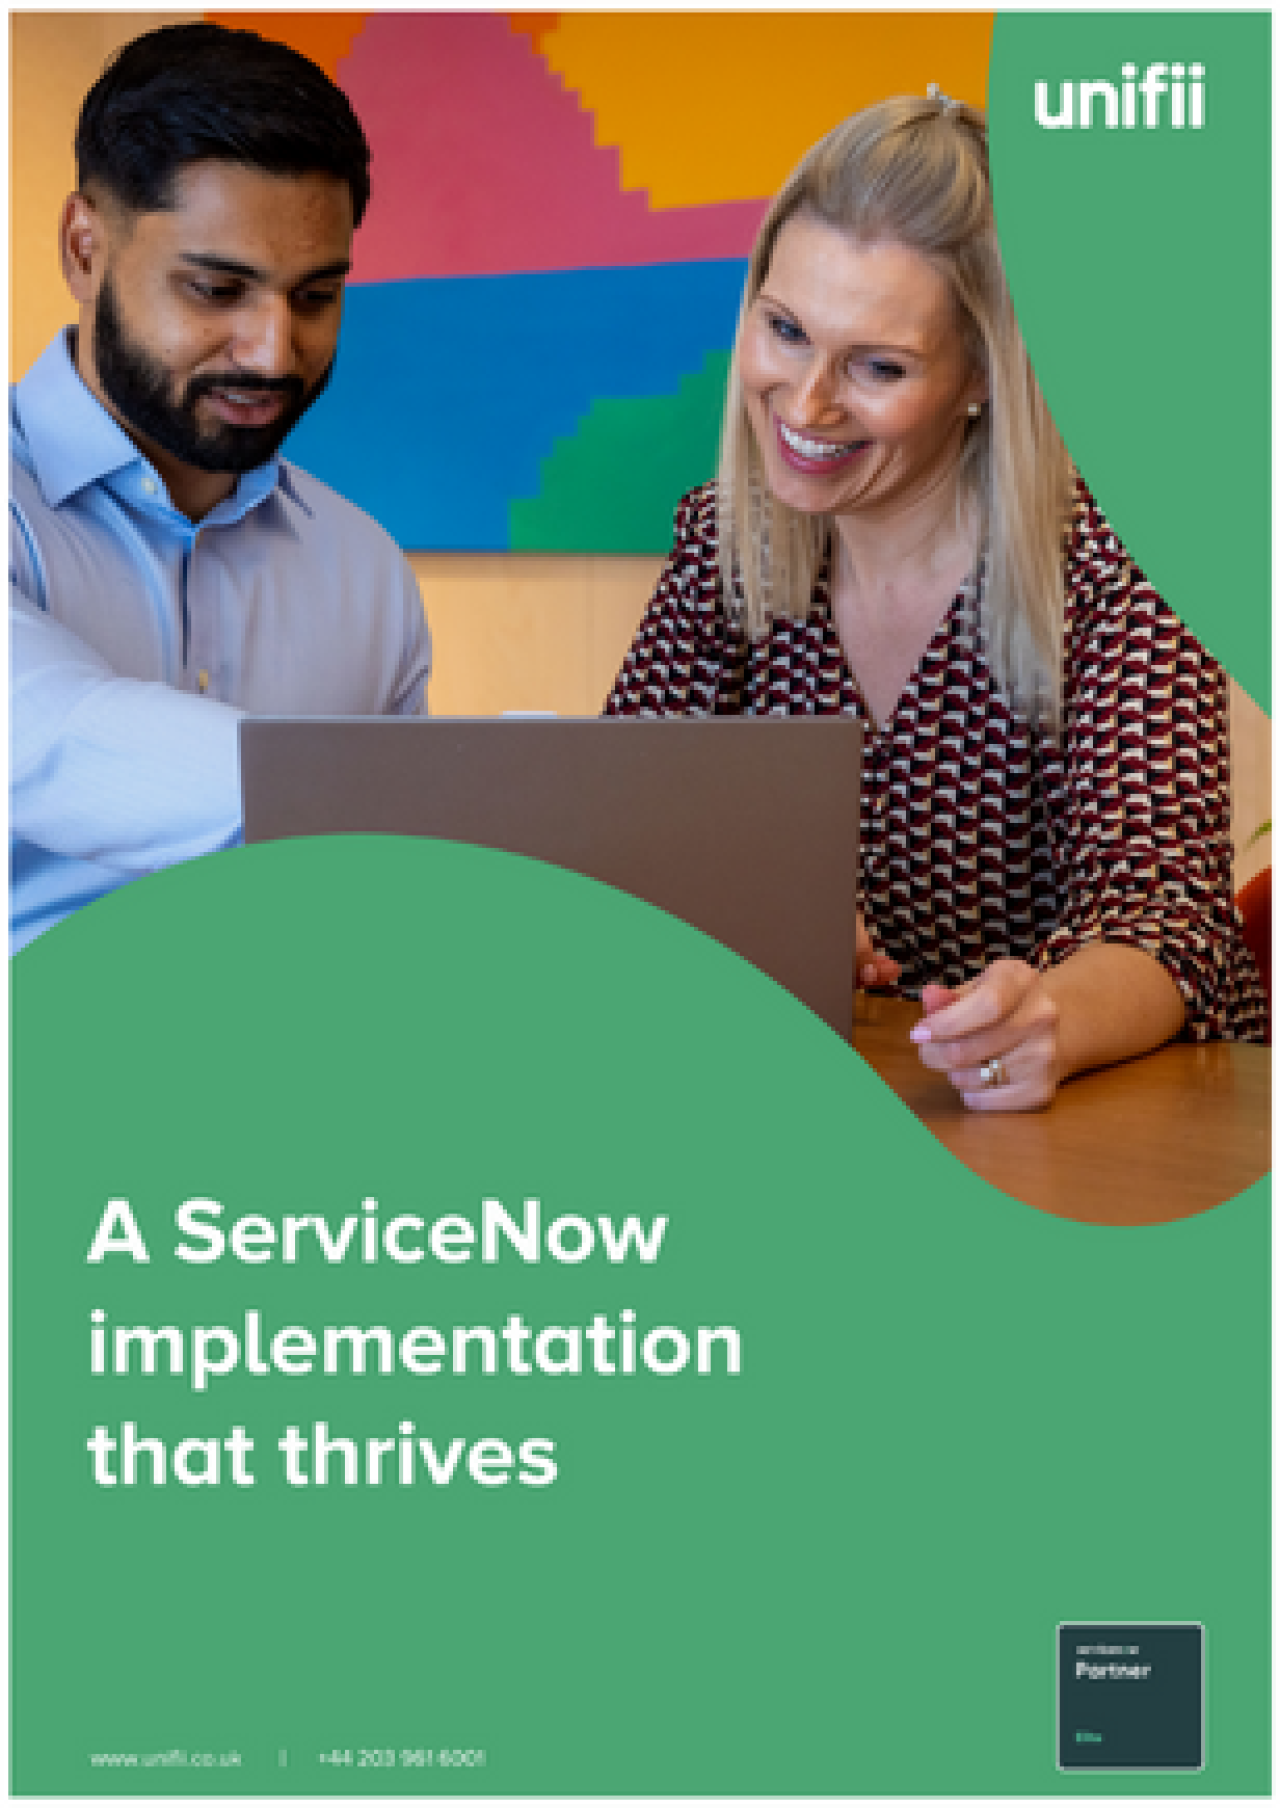 A ServiceNow implementation that thrives.